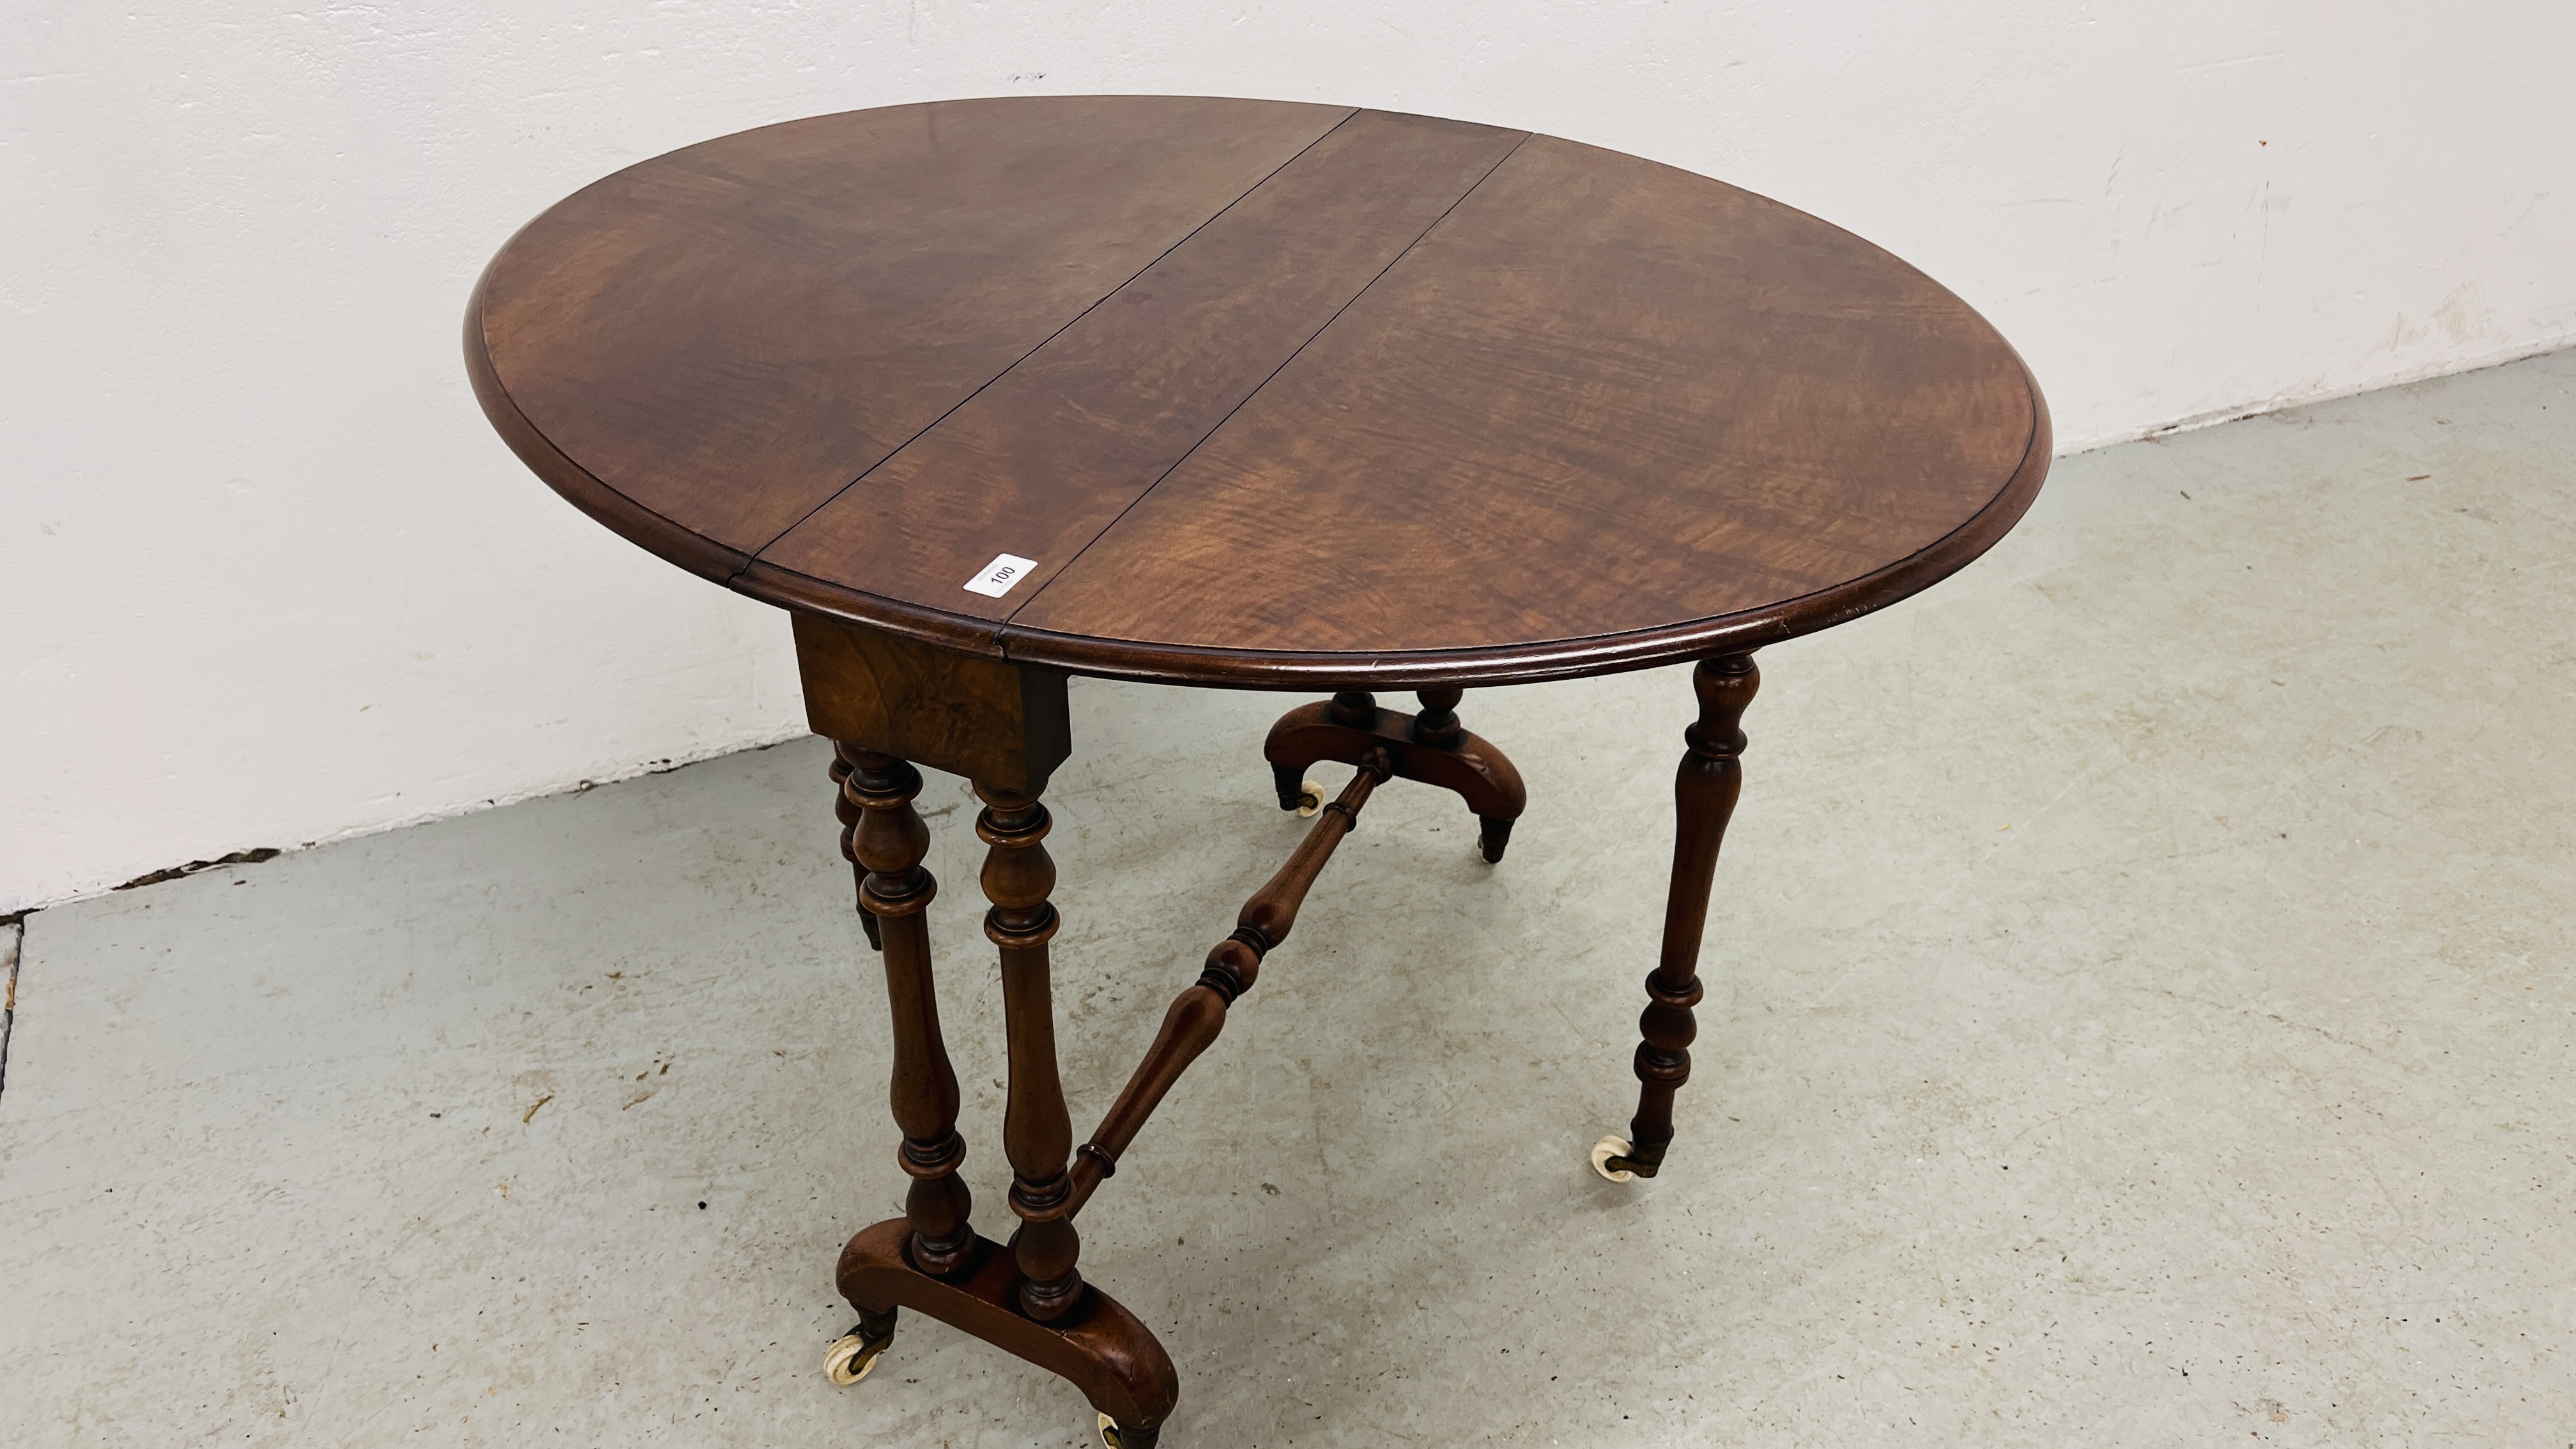 VICTORIAN WALNUT TEA TABLE WITH GATELEG ACTION AND OVAL TOP - EXTENDED 83CM. X 102CM. - Image 8 of 10